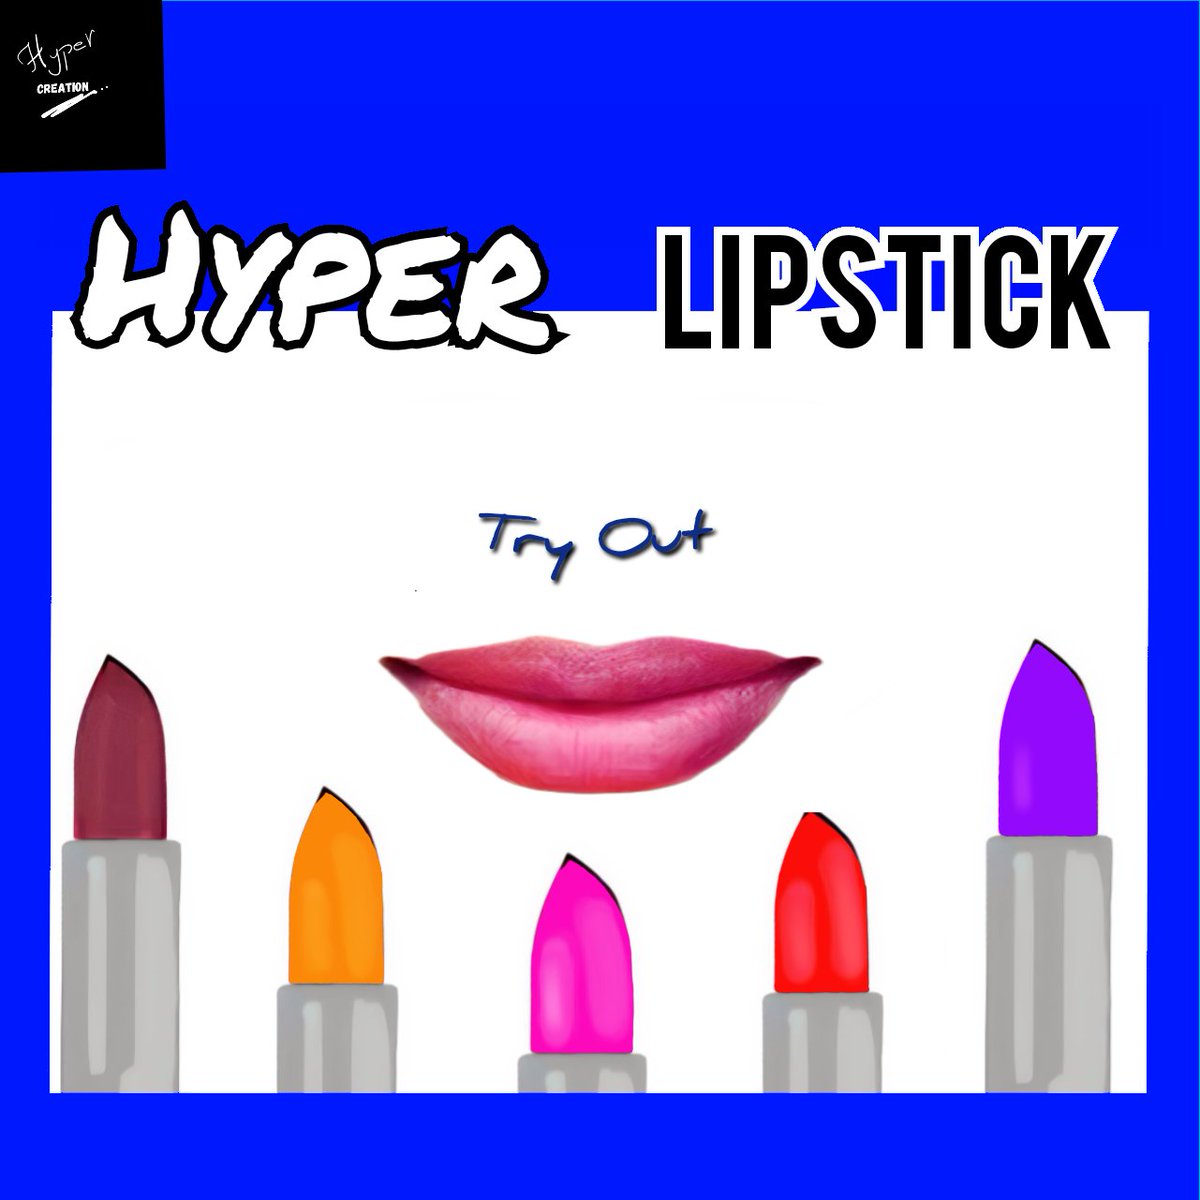 Product name: Hyper Lipstick Product type: Lipstick Tagline: Try Out Logo: Hyper_Creation Hyper Lipstick💄-Try Out. #lip #lips #lipstick #lipstick💄 #lipsticks #digitalmarketing #digitalmarketingtips #digitalmarketers #Hyper_Creation